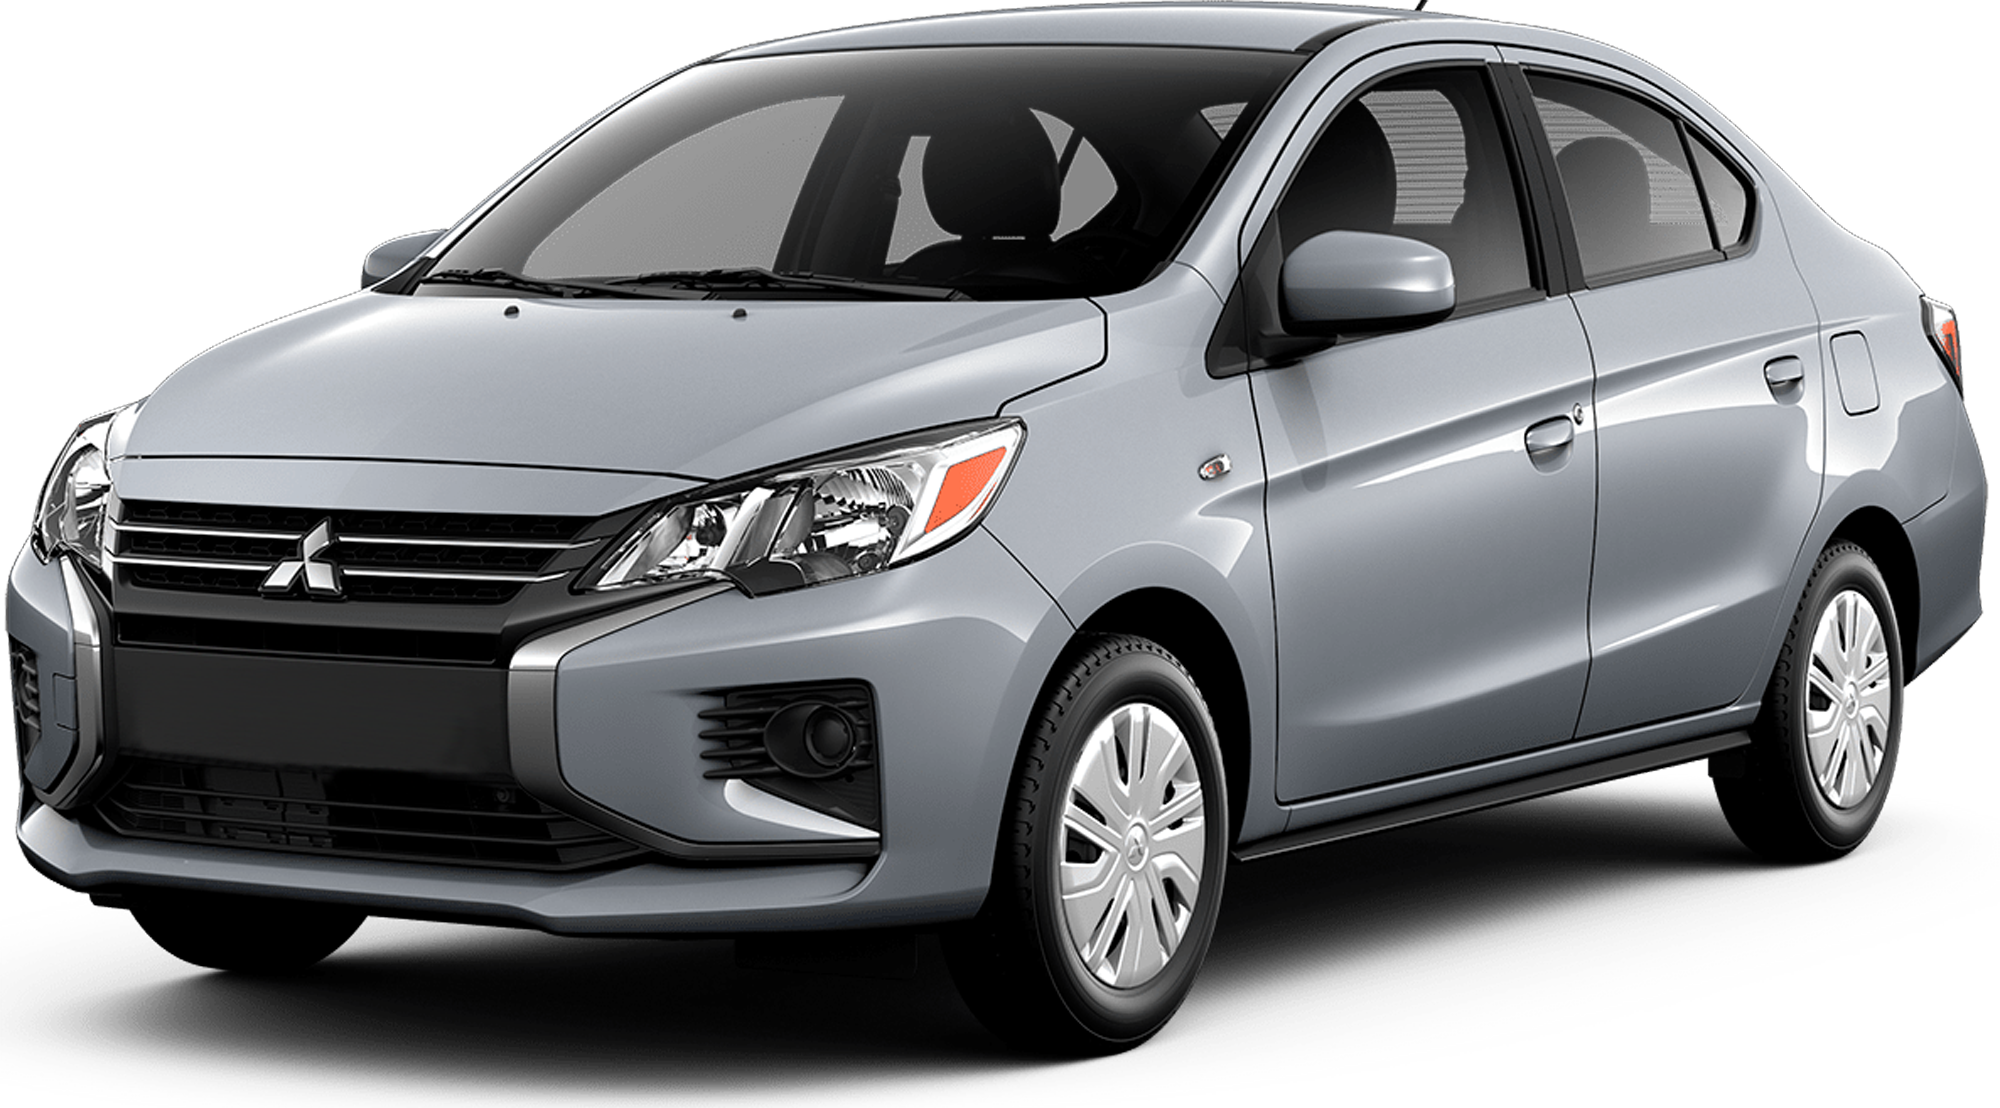 2023 Mitsubishi Mirage G4 Incentives, Specials & Offers in TALLAHASSEE FL